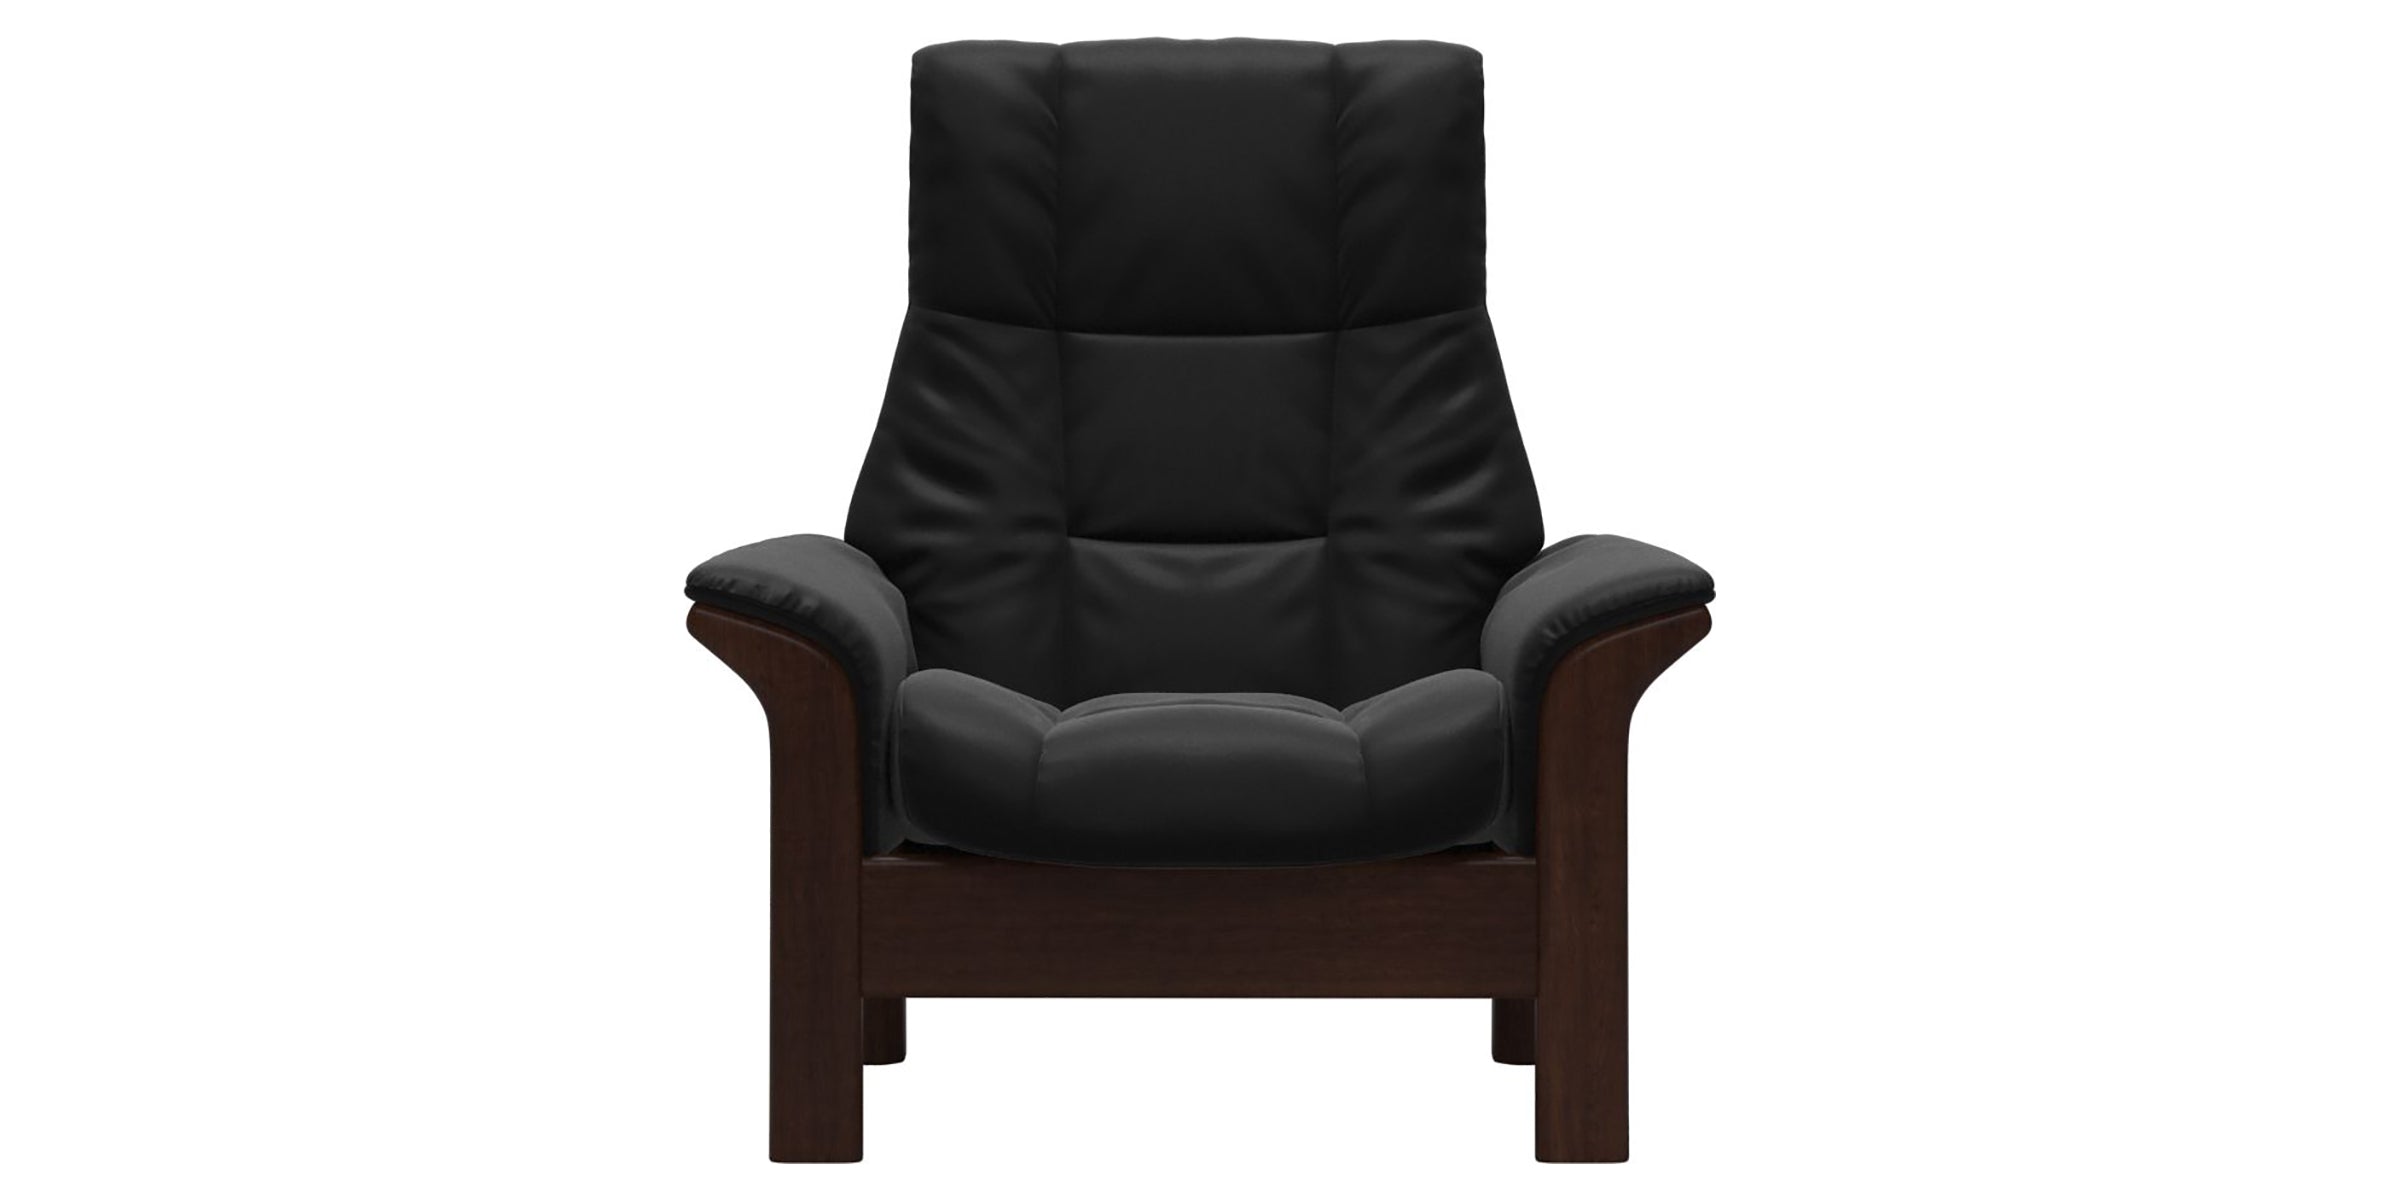 Paloma Leather Black and Brown Base | Stressless Windsor High Back Chair | Valley Ridge Furniture